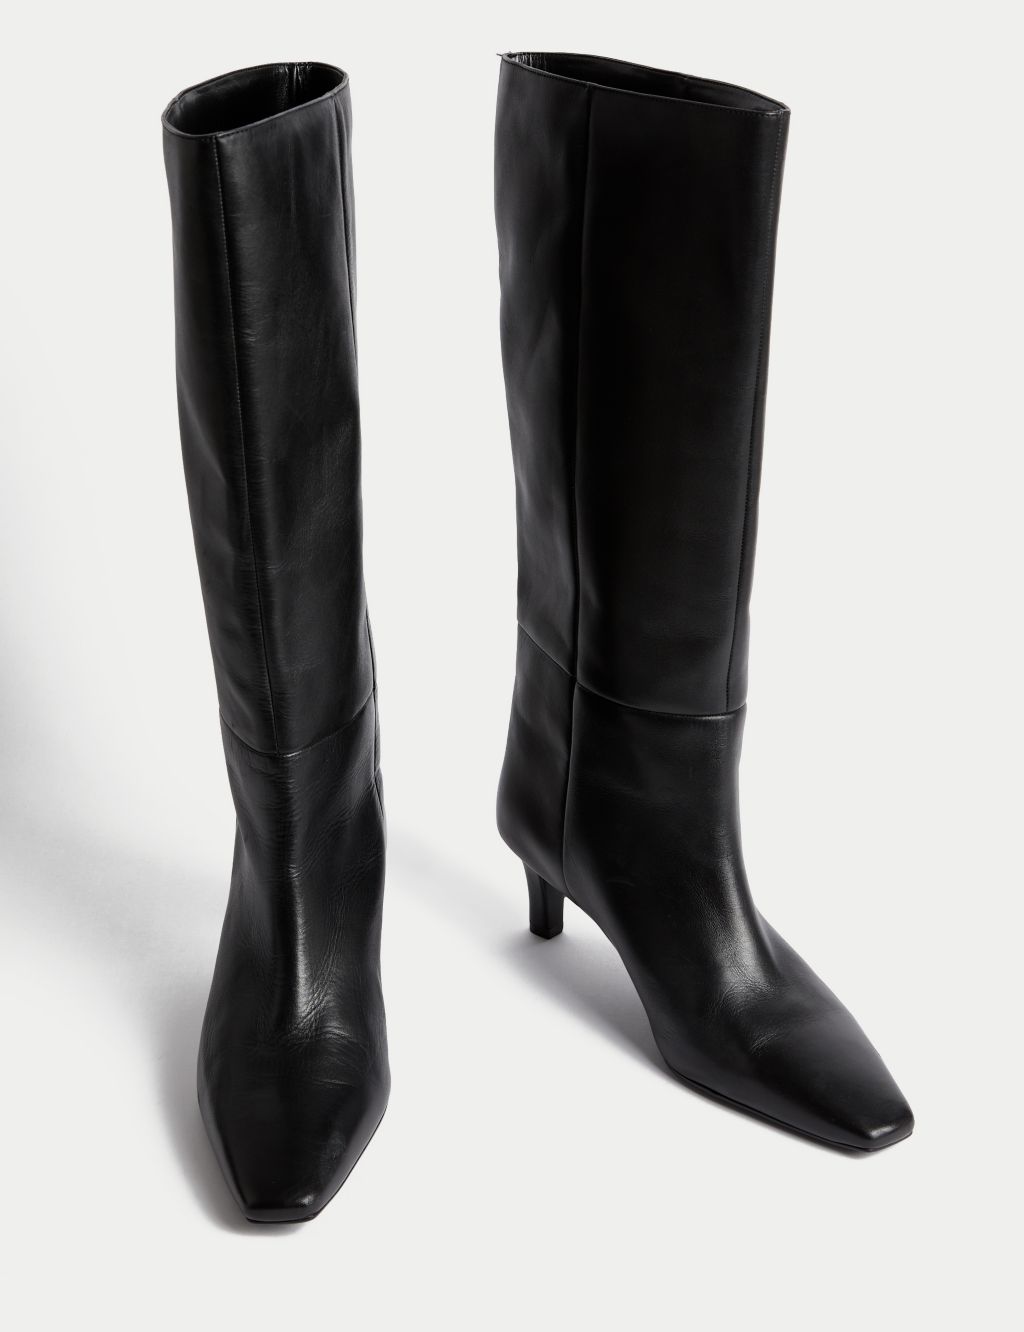 Sexy Women's Faux Leather High Heels Boots Skinny Legs Round